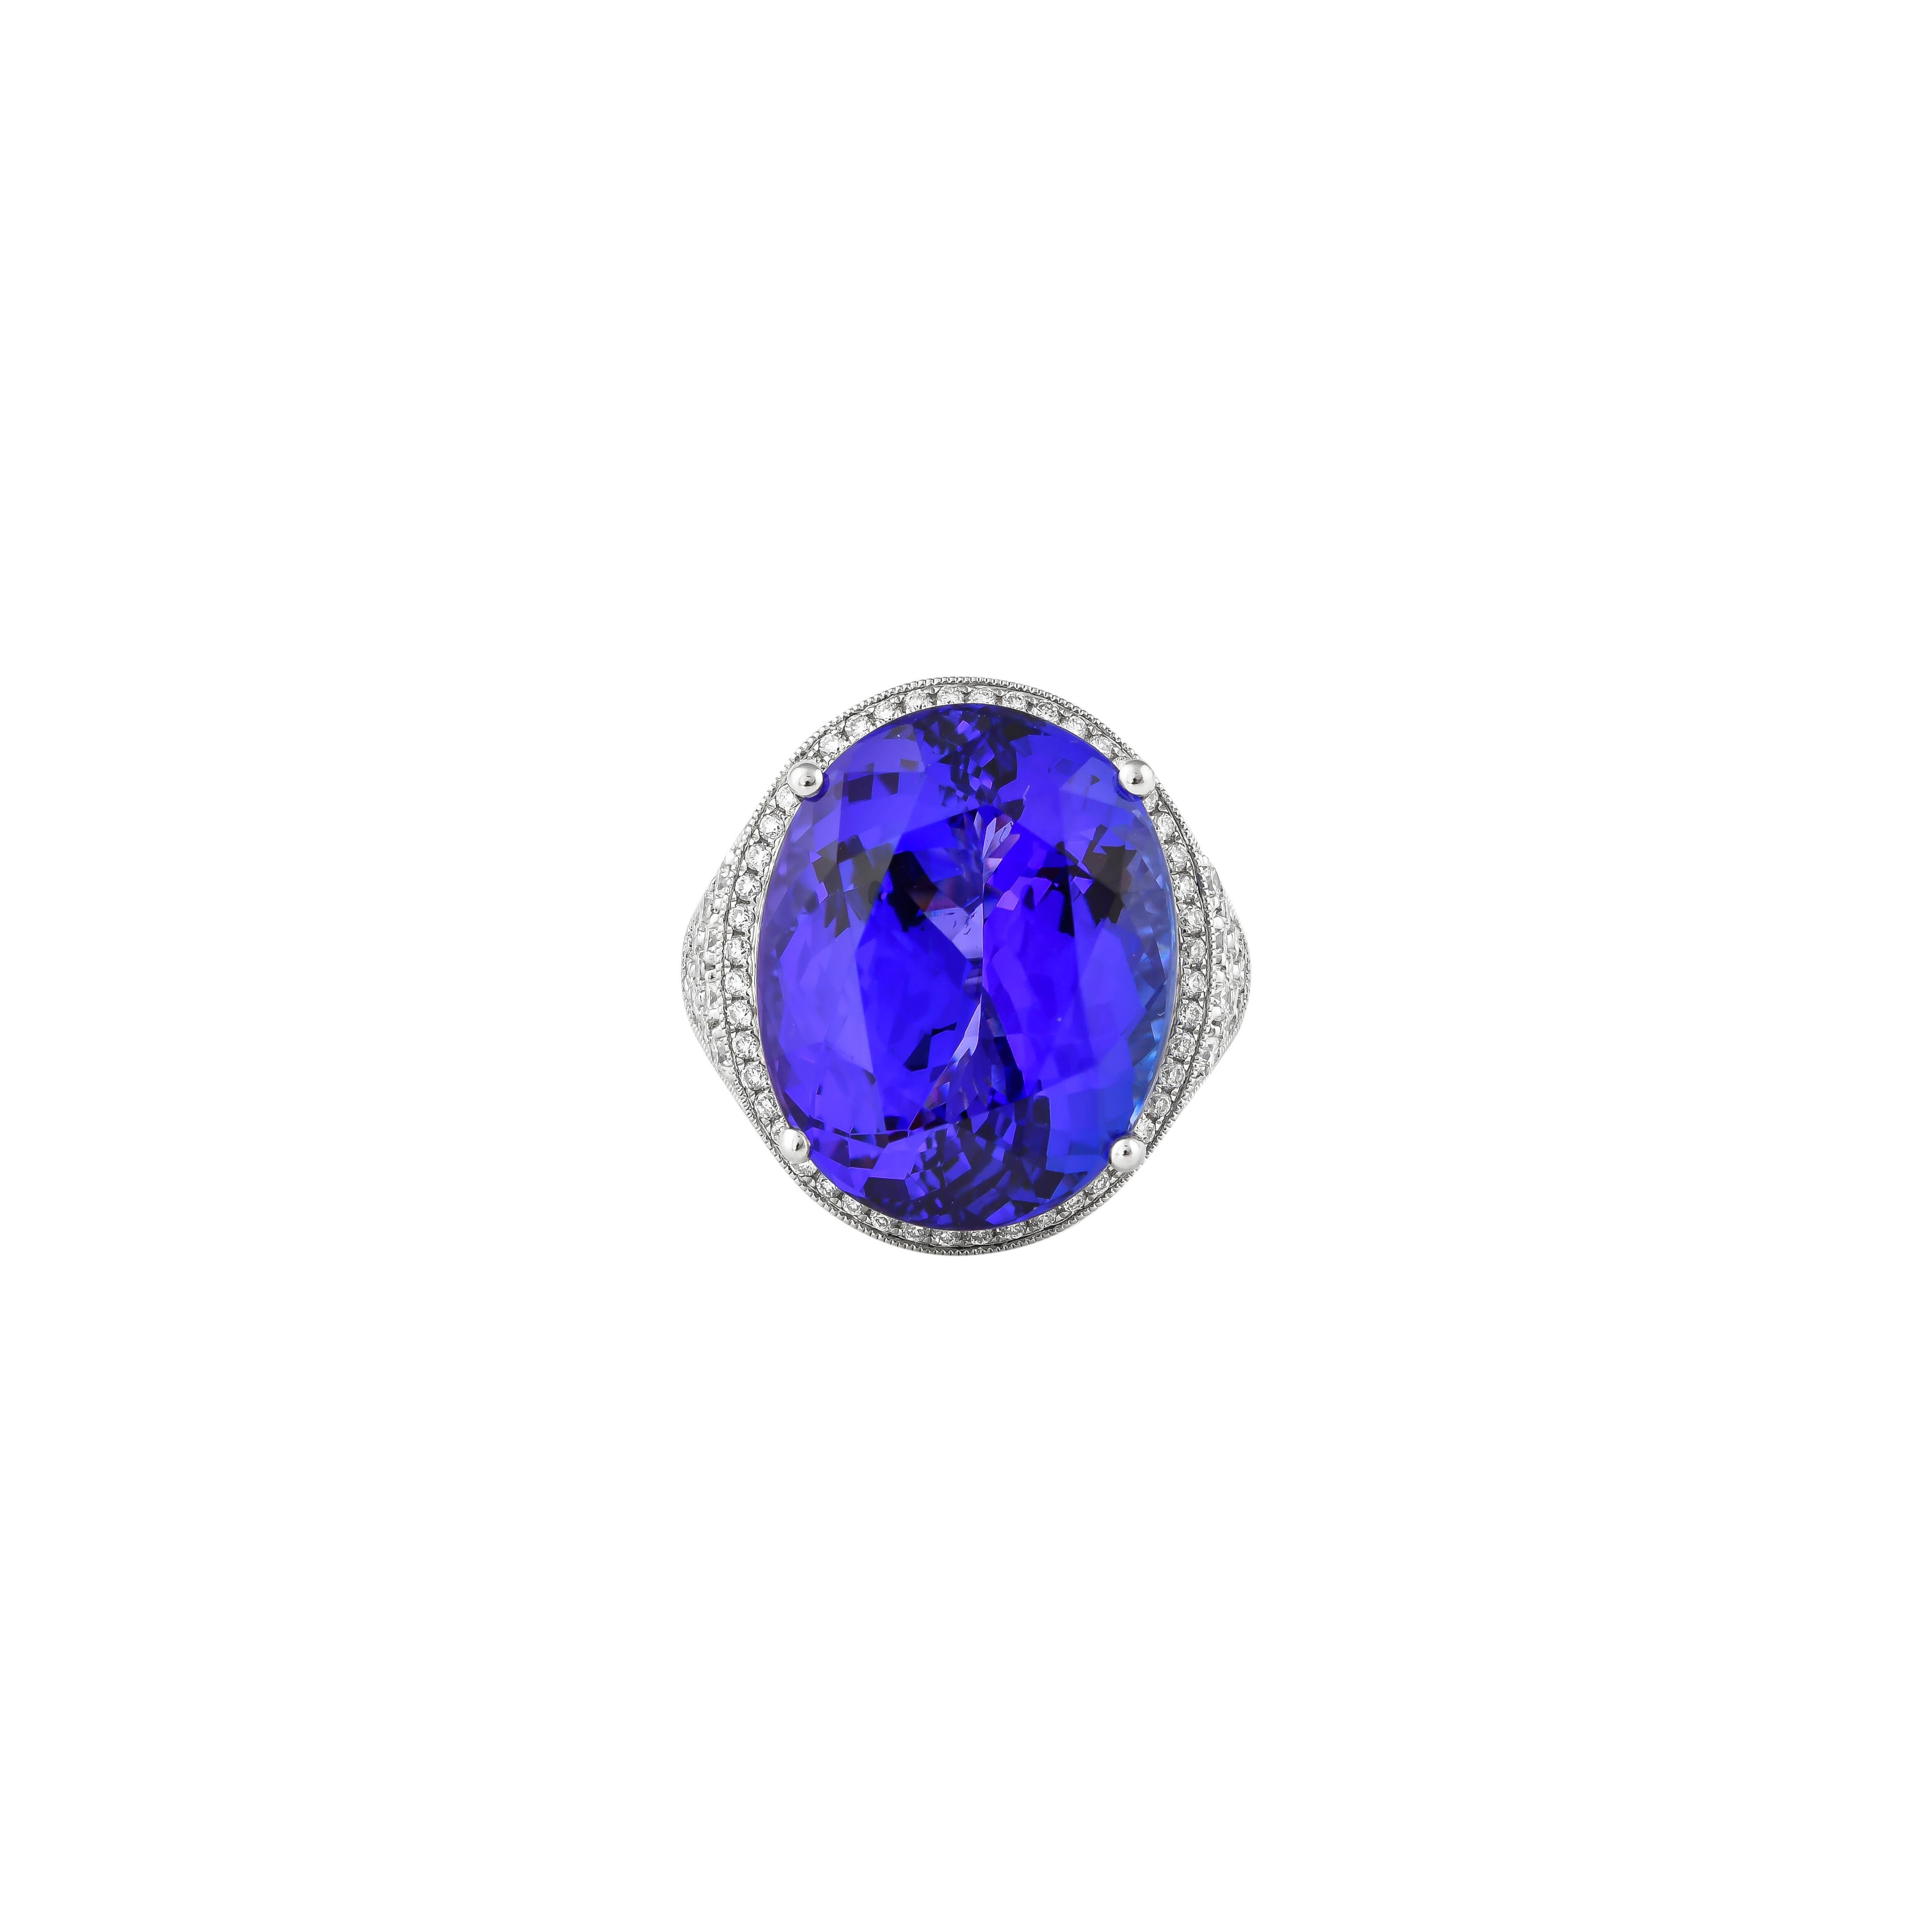 Oval Cut 19.8 Carat Tanzanite and White Diamond Ring in 18 Karat White Gold For Sale